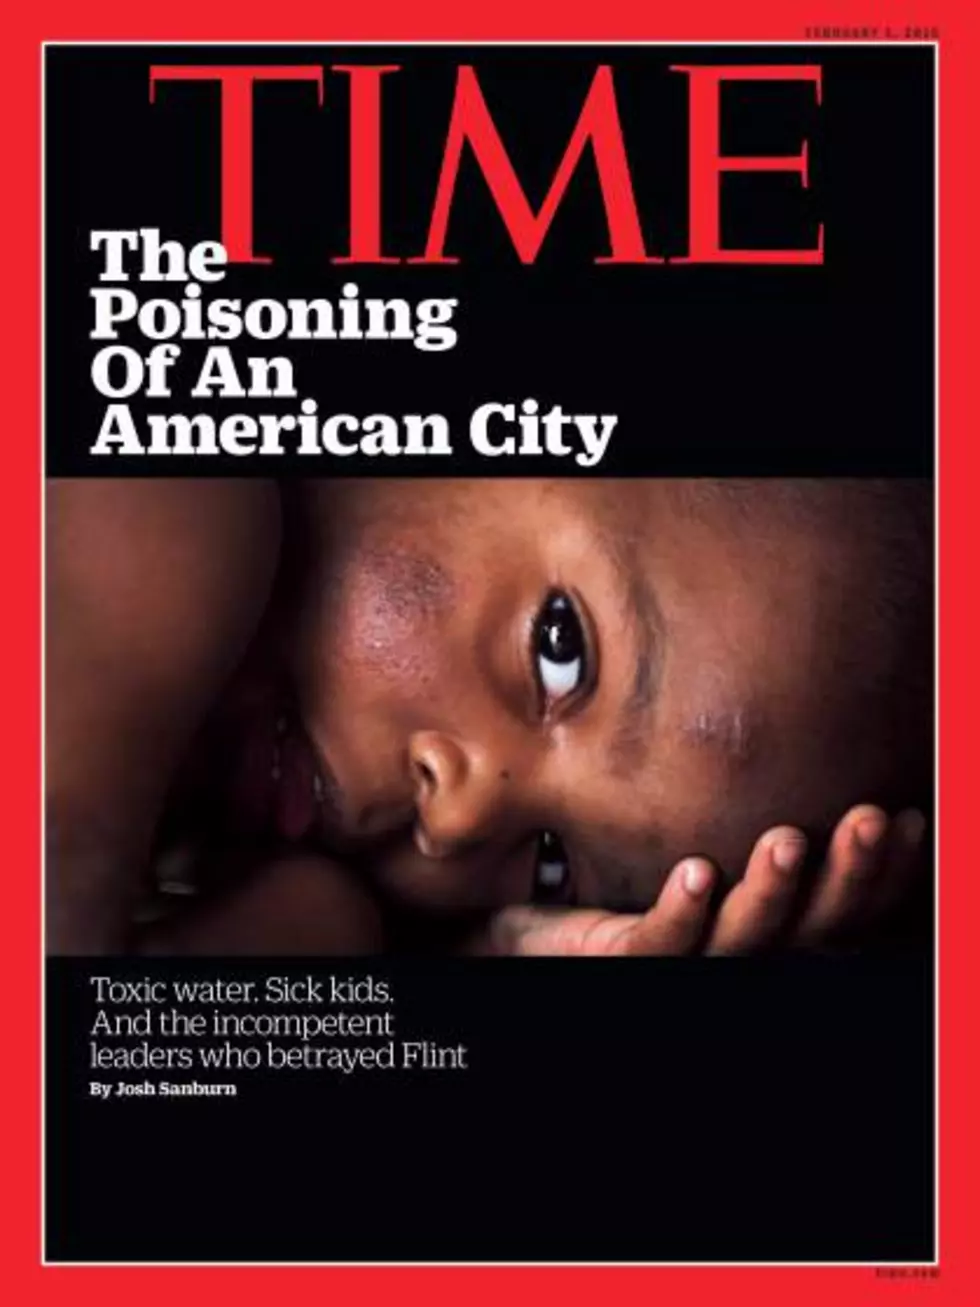 Flint Water Crisis Makes the Cover of TIME Magazine